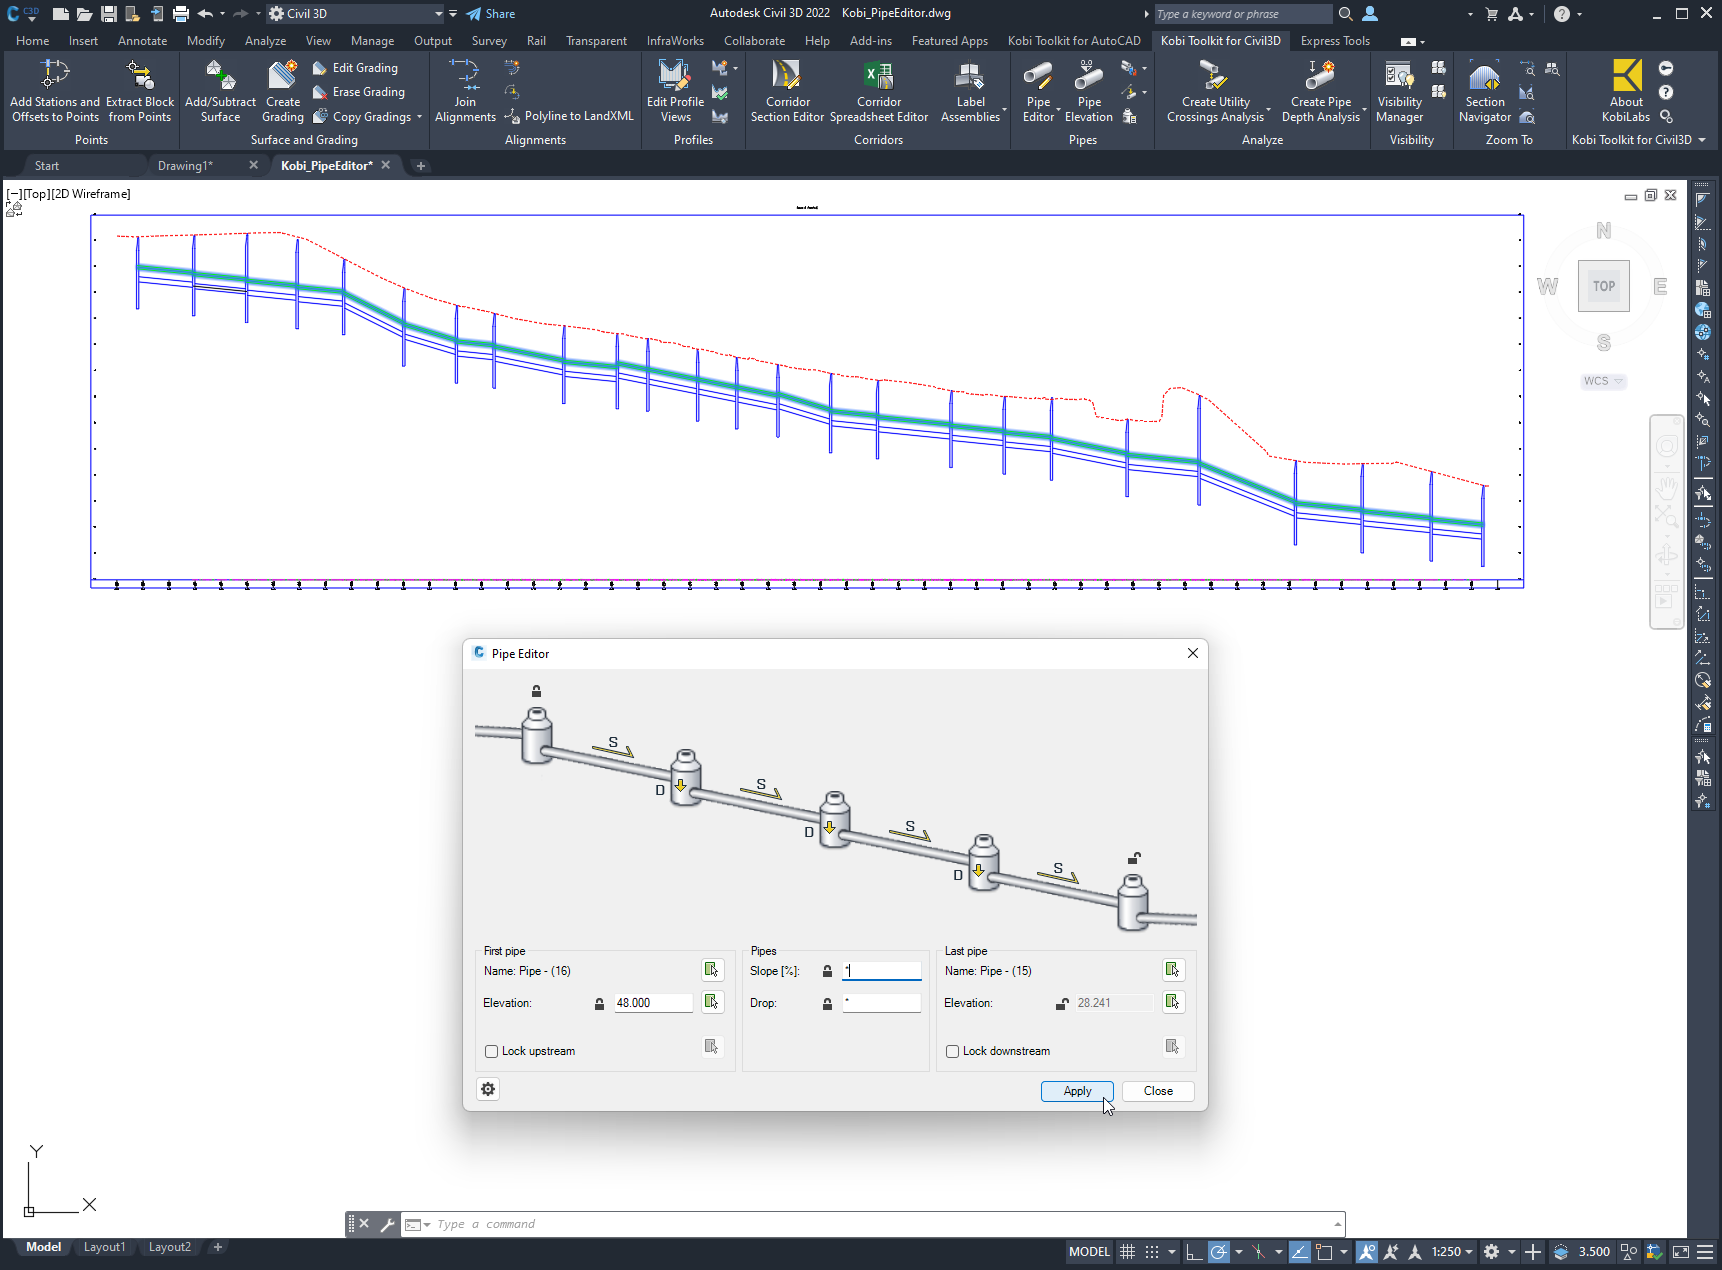 Kobi Toolkit for Civil 3D - Pipe editor. This tool enables you to edit multiple pipes. Use the intuitive user interface to define how pipes should behave and apply changes to the whole pipe set.